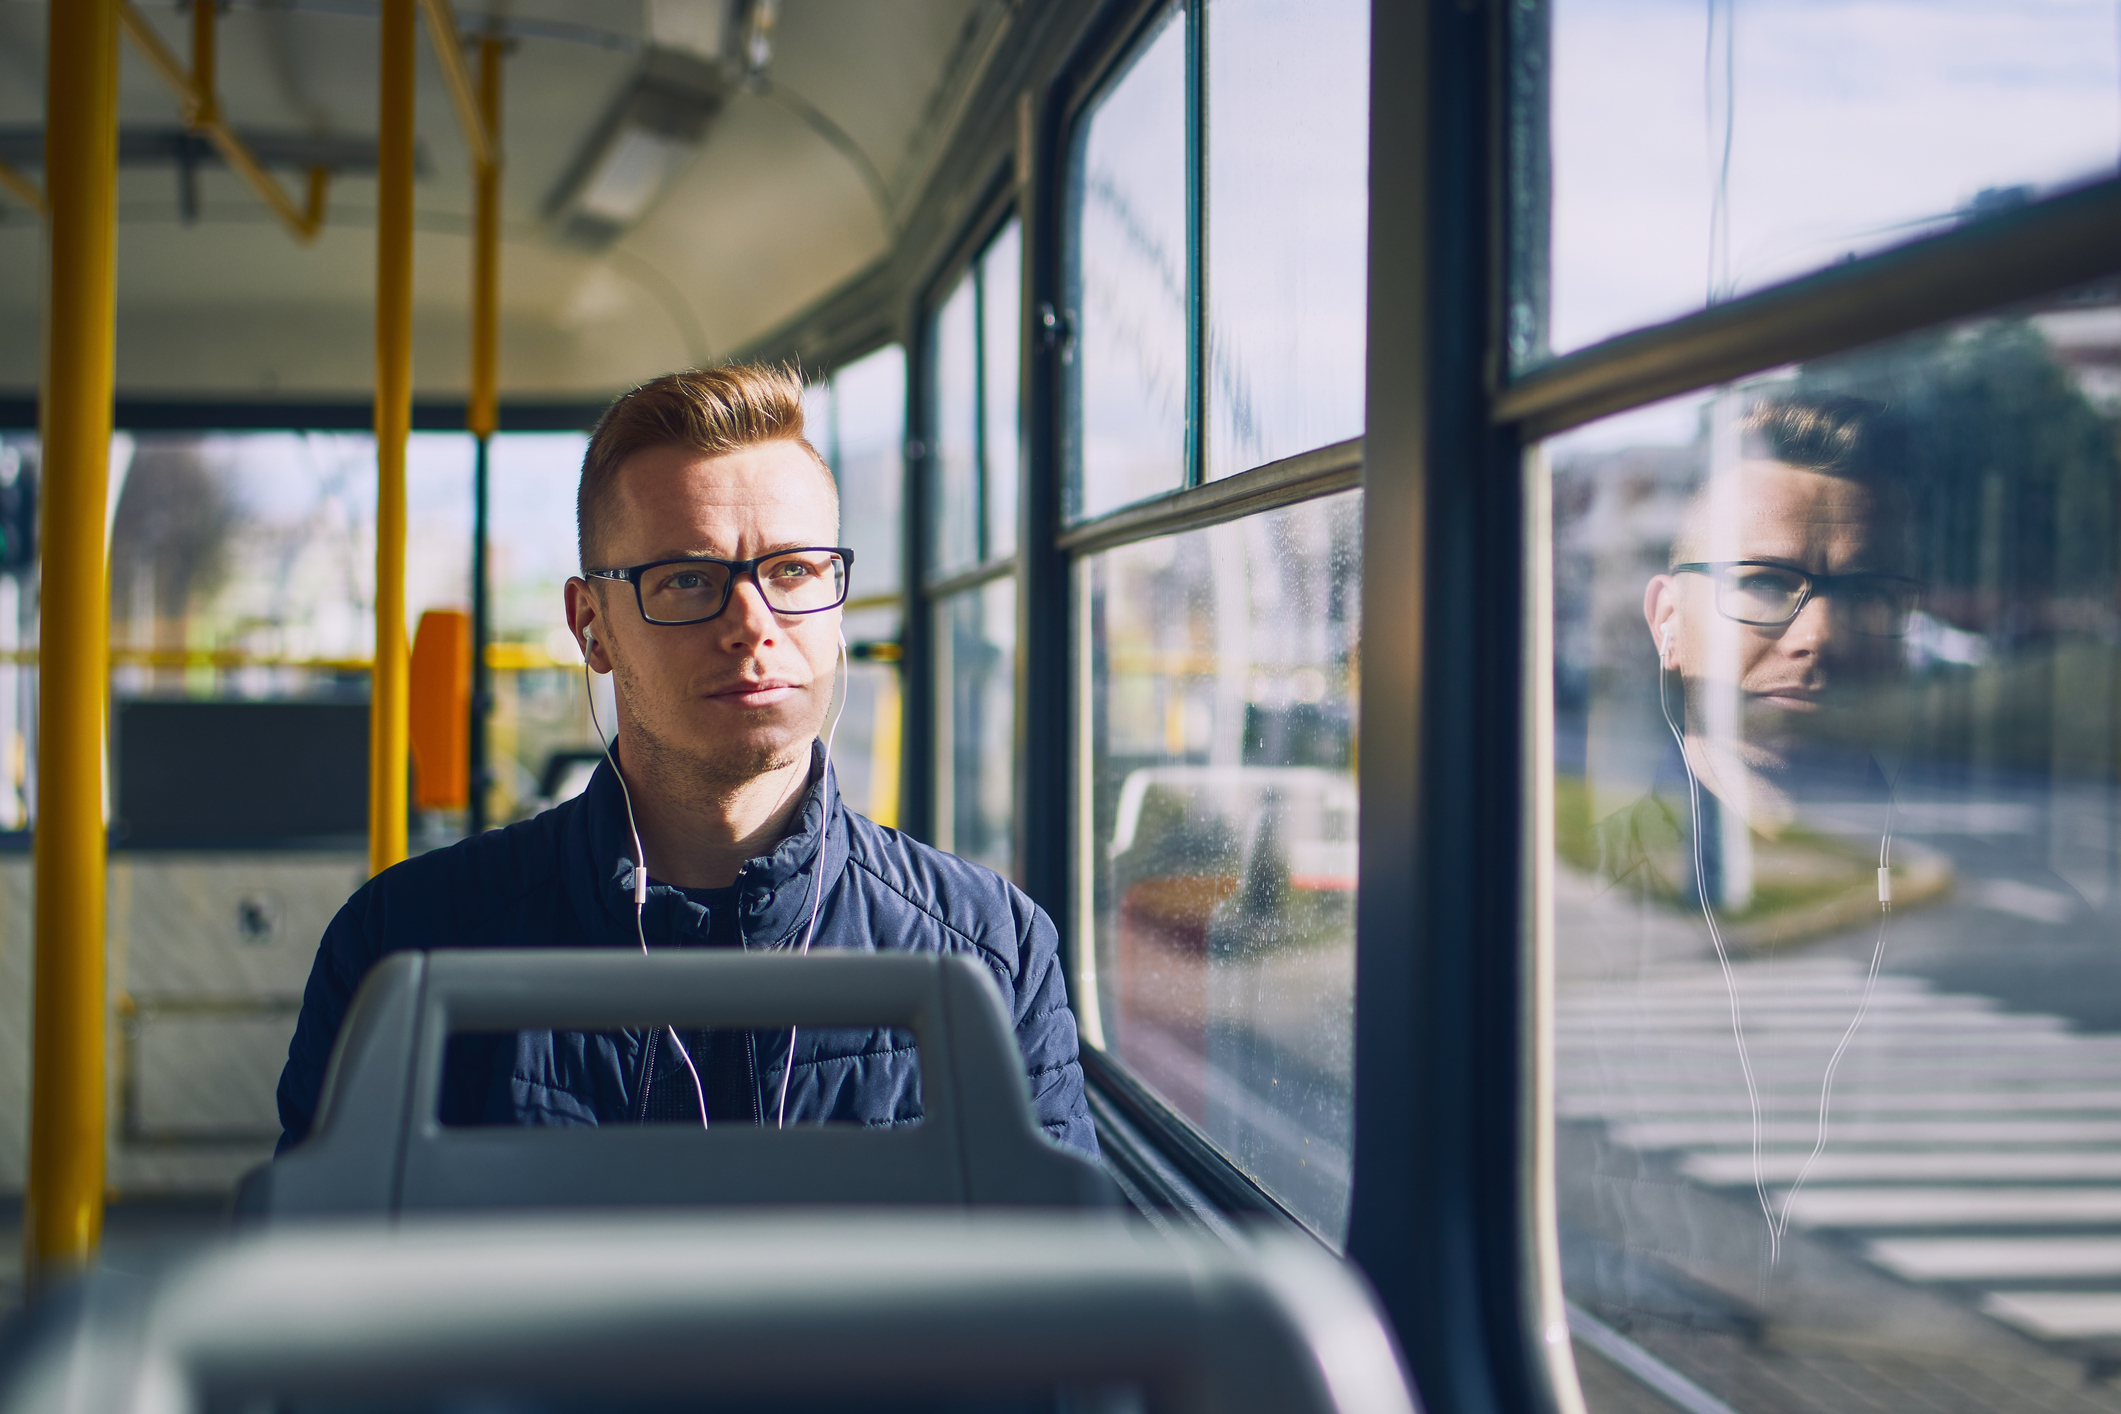 Man wearing glasses sitting inside a bus, looking at the camera, with reflection on the window